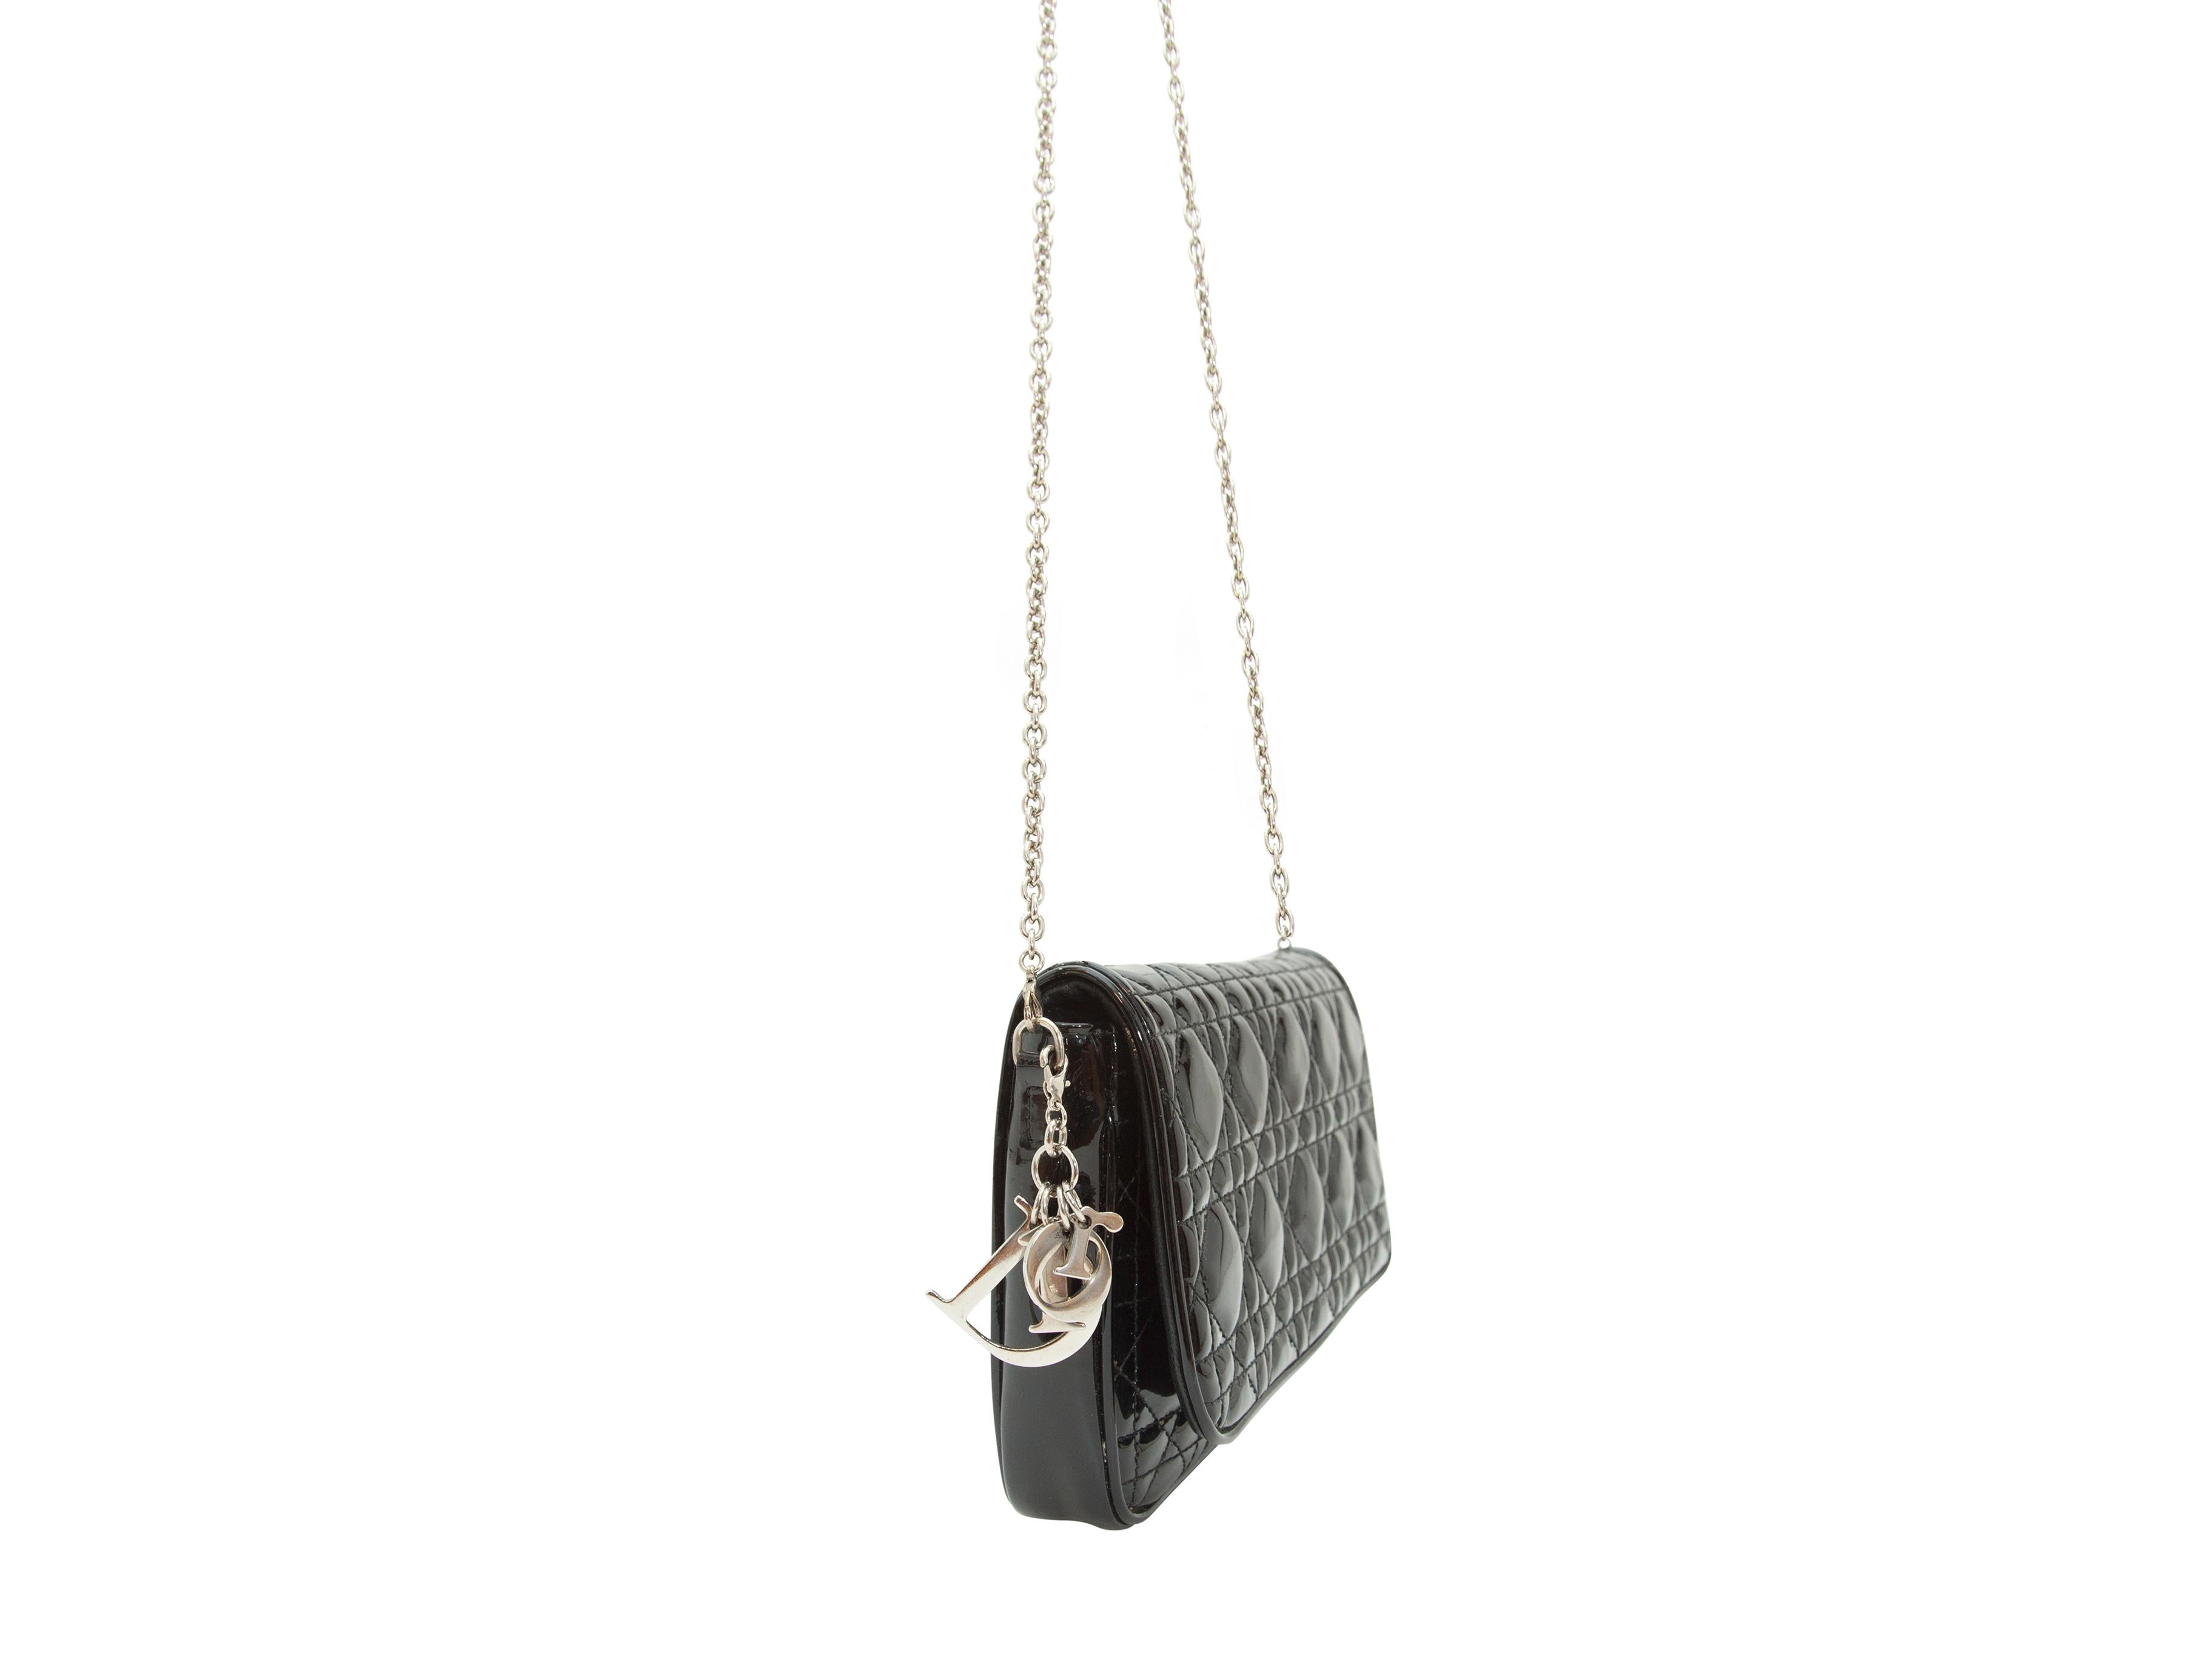 Product details:  Black quilted patent leather crossbody bag by Christian Dior.   Detachable chain crossbody strap.  Front flap with concealed closure.  Lined interior with inner credit card slots.  Silvertone hardware.  9